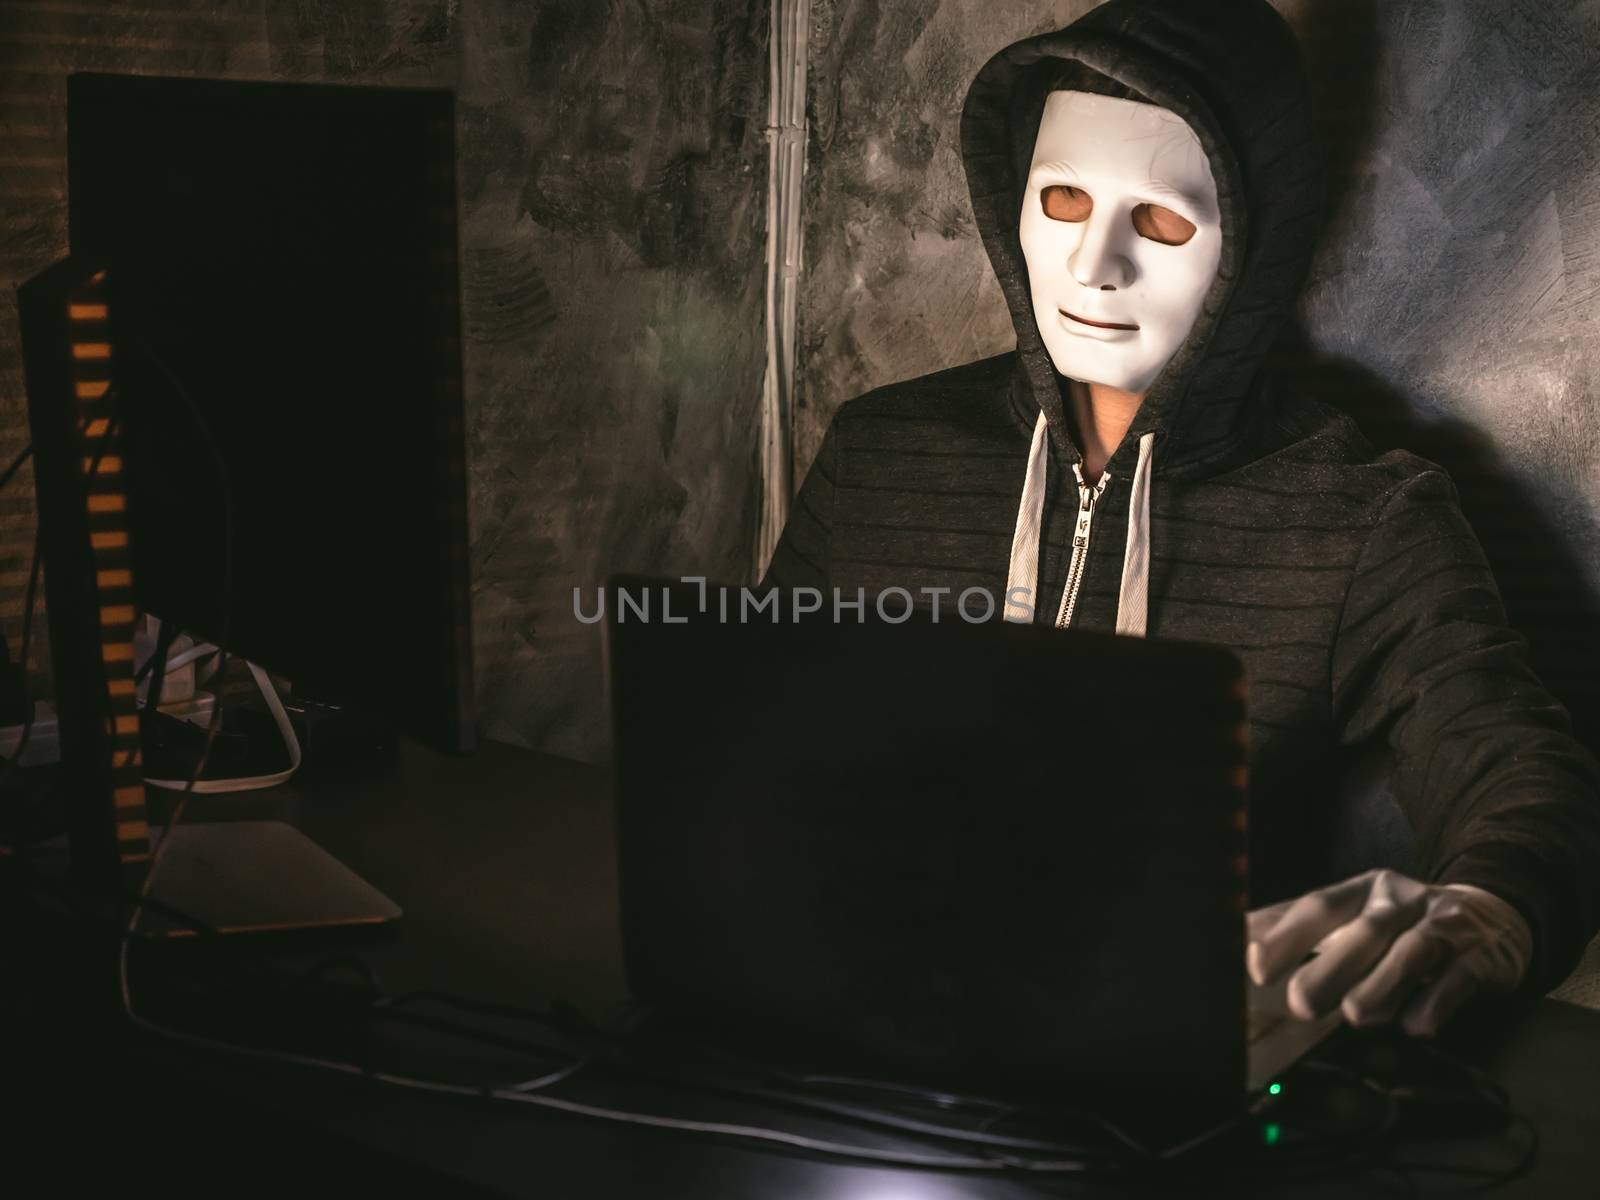 Computer hacker - Man in hoodie shirt with mask stealing data from laptop by ronnarong